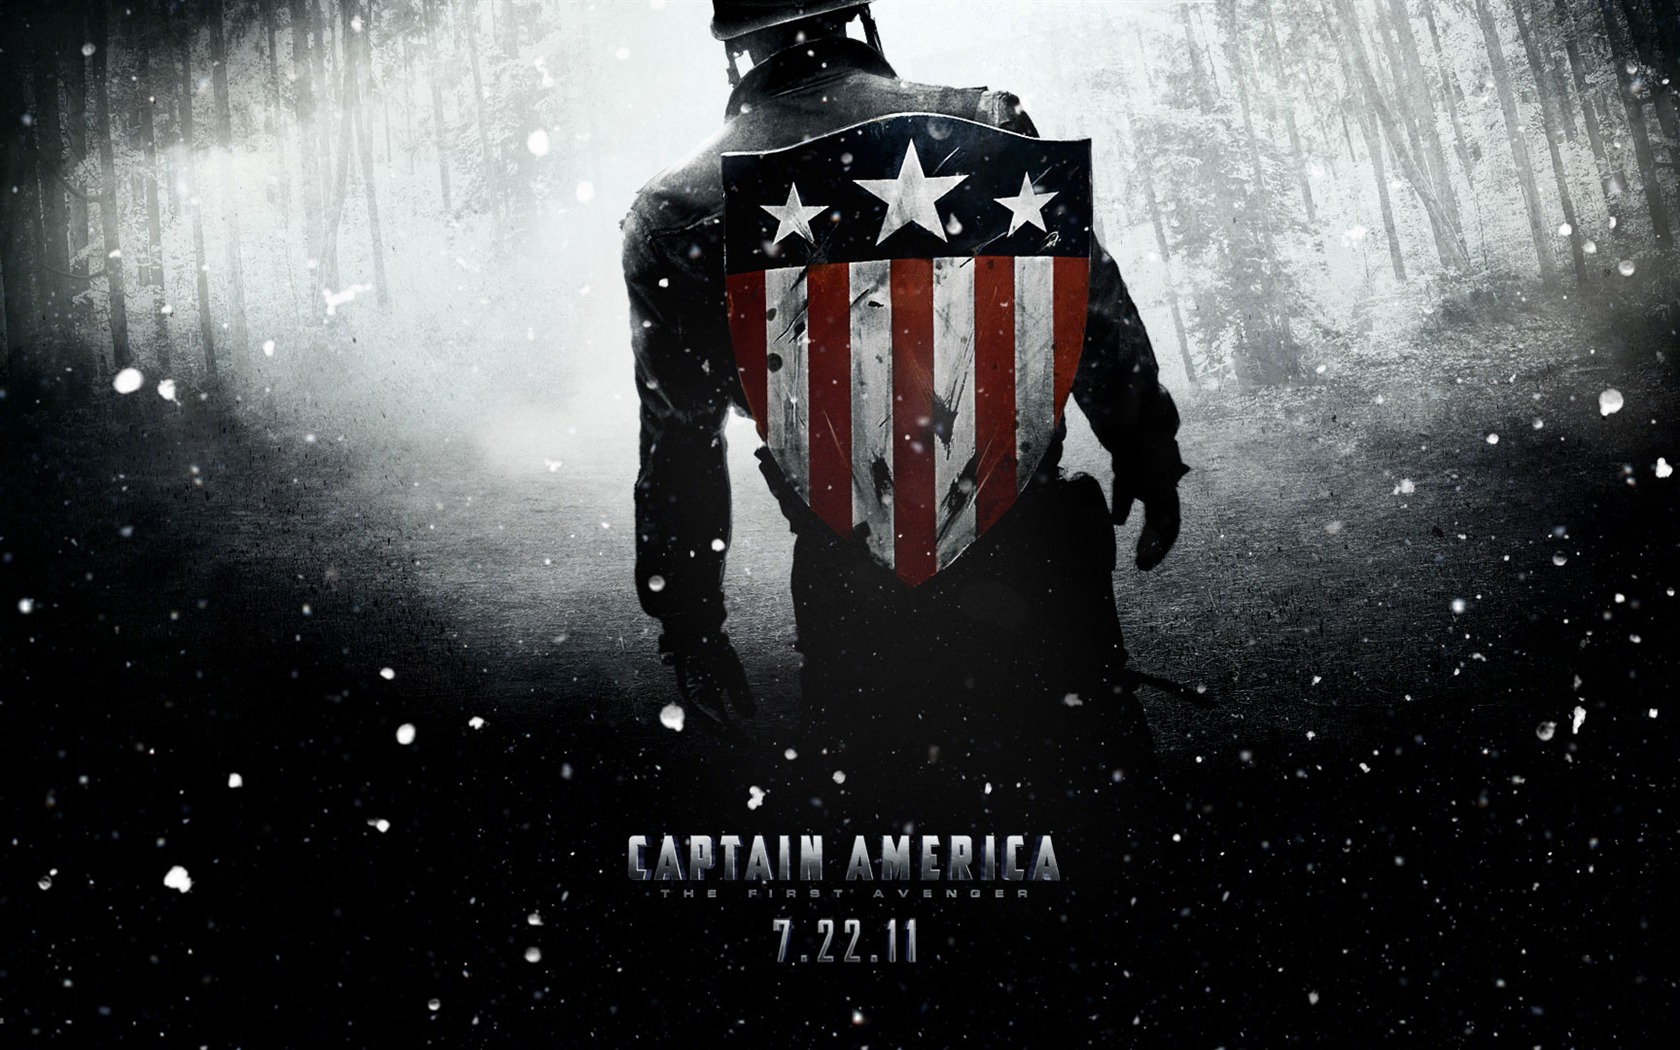 Captain America: The First Avenger wallpapers HD #3 - 1680x1050